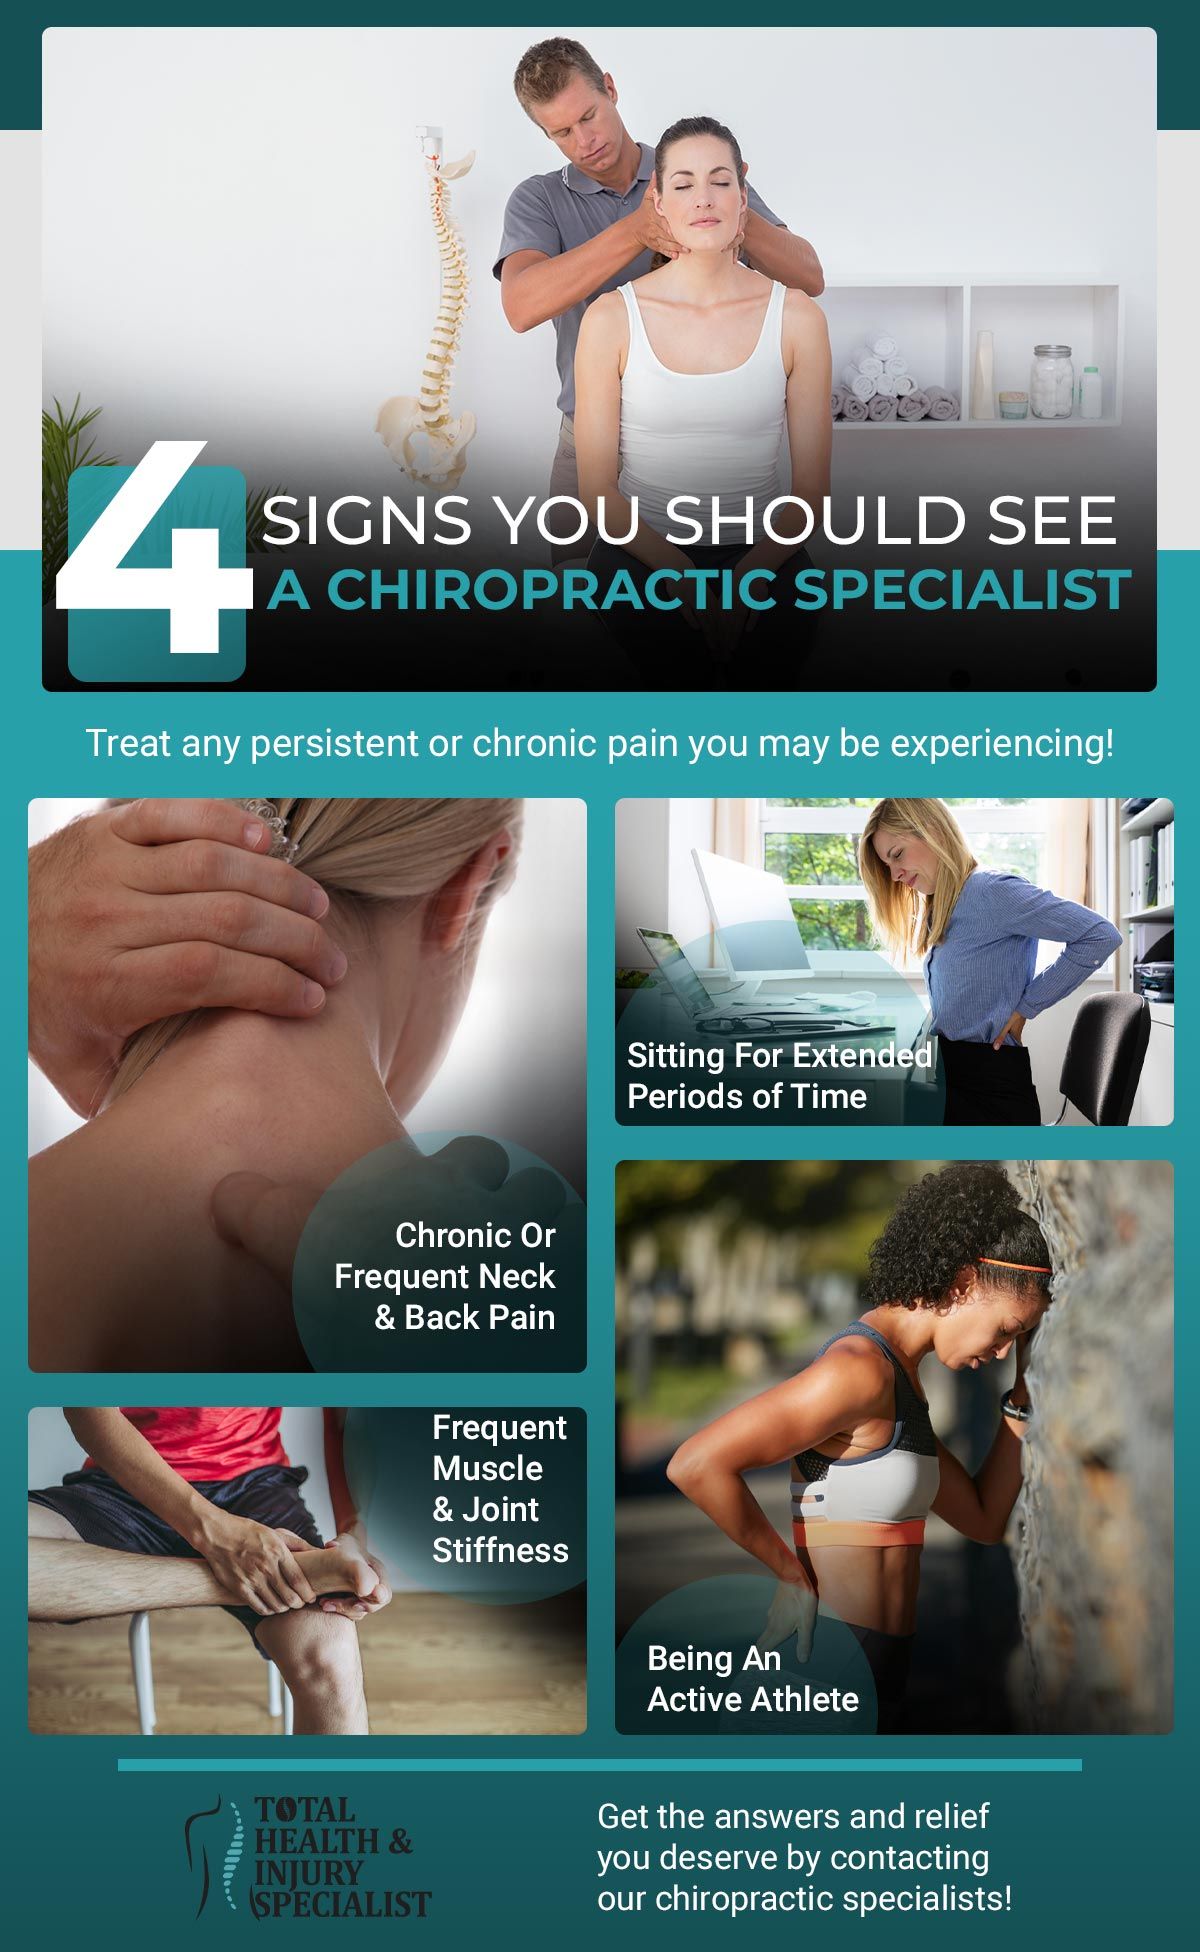 4-Signs-You-Should-See-A-Chiropractic-Specialist-620e8f0a00ef8.jpg